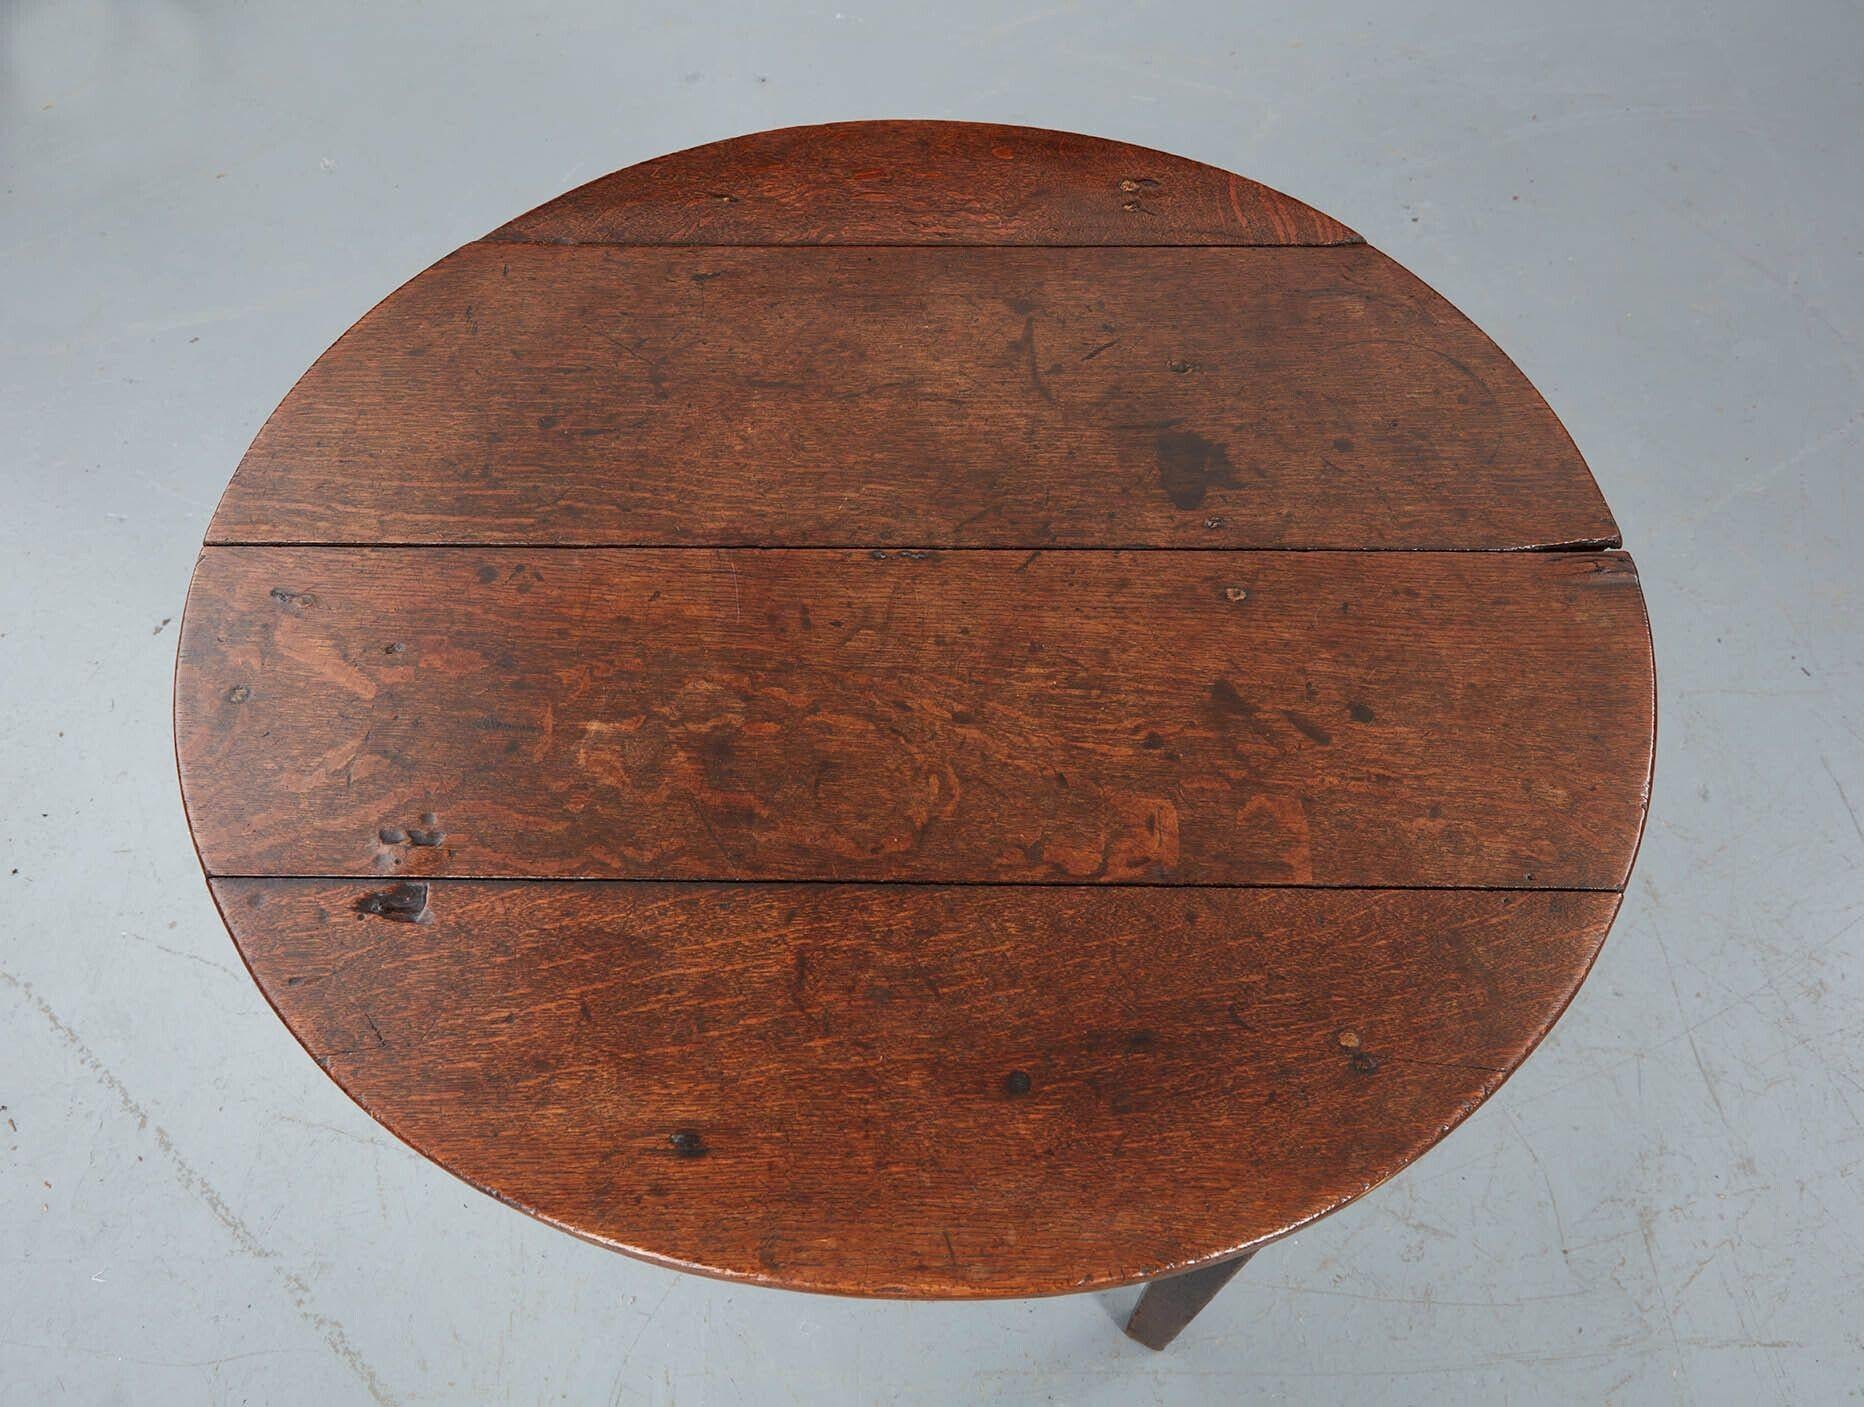 Oak four plank cricket table with eased apron over three quad section legs. Good size for two person dining or for use as a lamp table next to a sofa. Country house condition - some splits and chips.